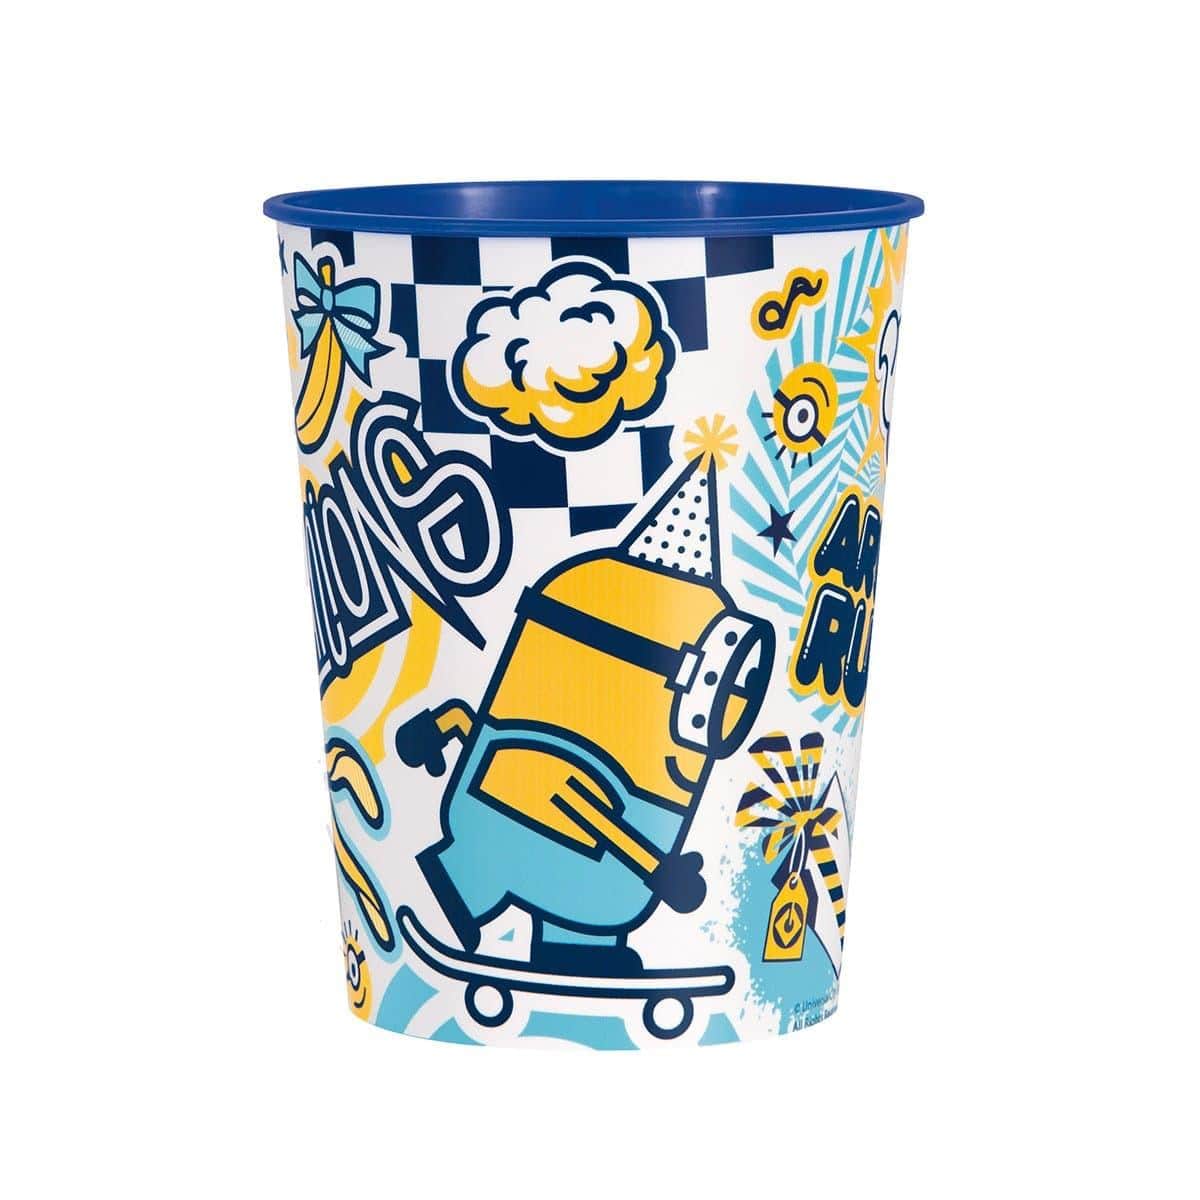 Buy Kids Birthday Minions Plastic Favor Cup sold at Party Expert